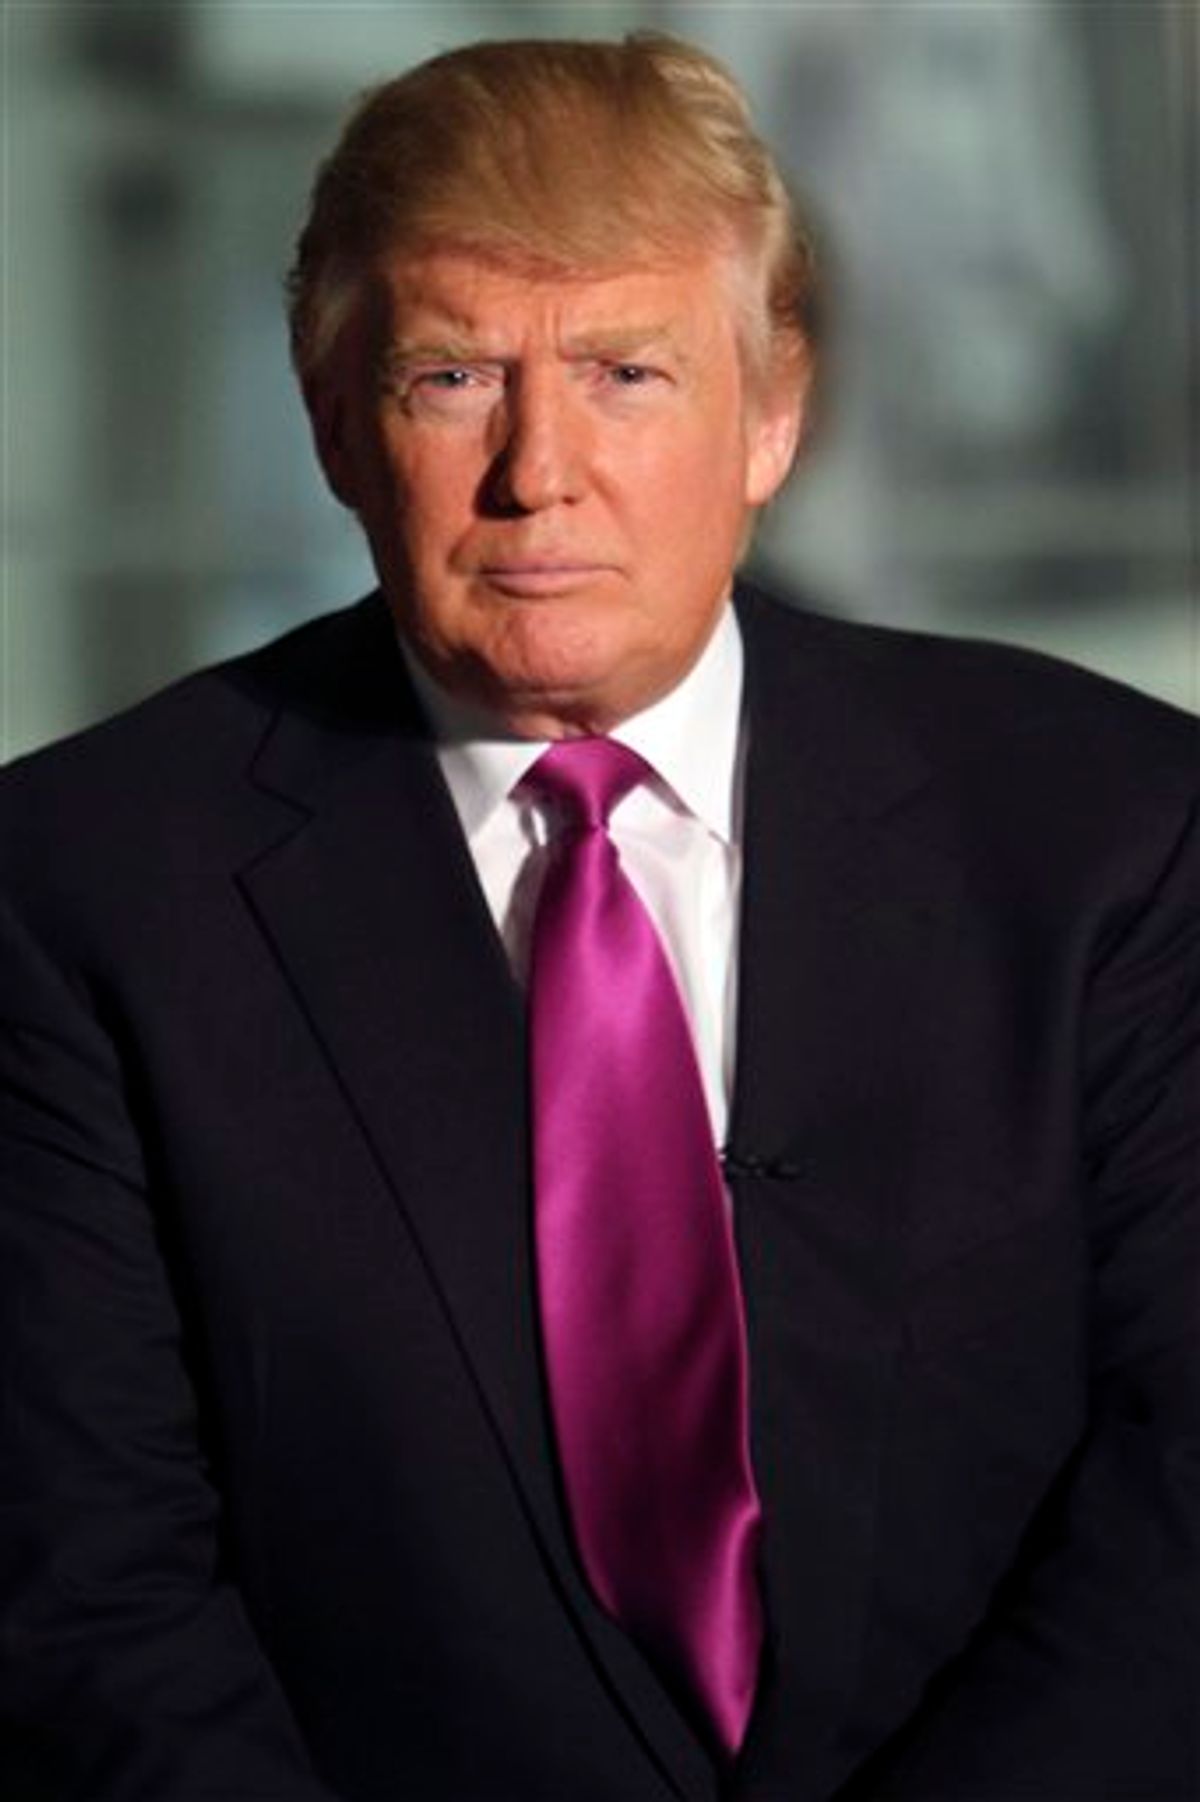 Donald Trump is photographed during a news conference at the Trump Tower, Tuesday, April 5, 2011 in New York. Indianapolis Motors Speedway announced Tuesday that Trump will be the 100th Anniversary Indianapolis 500 pace car driver. (AP Photo/Mary Altaffer)  (AP)